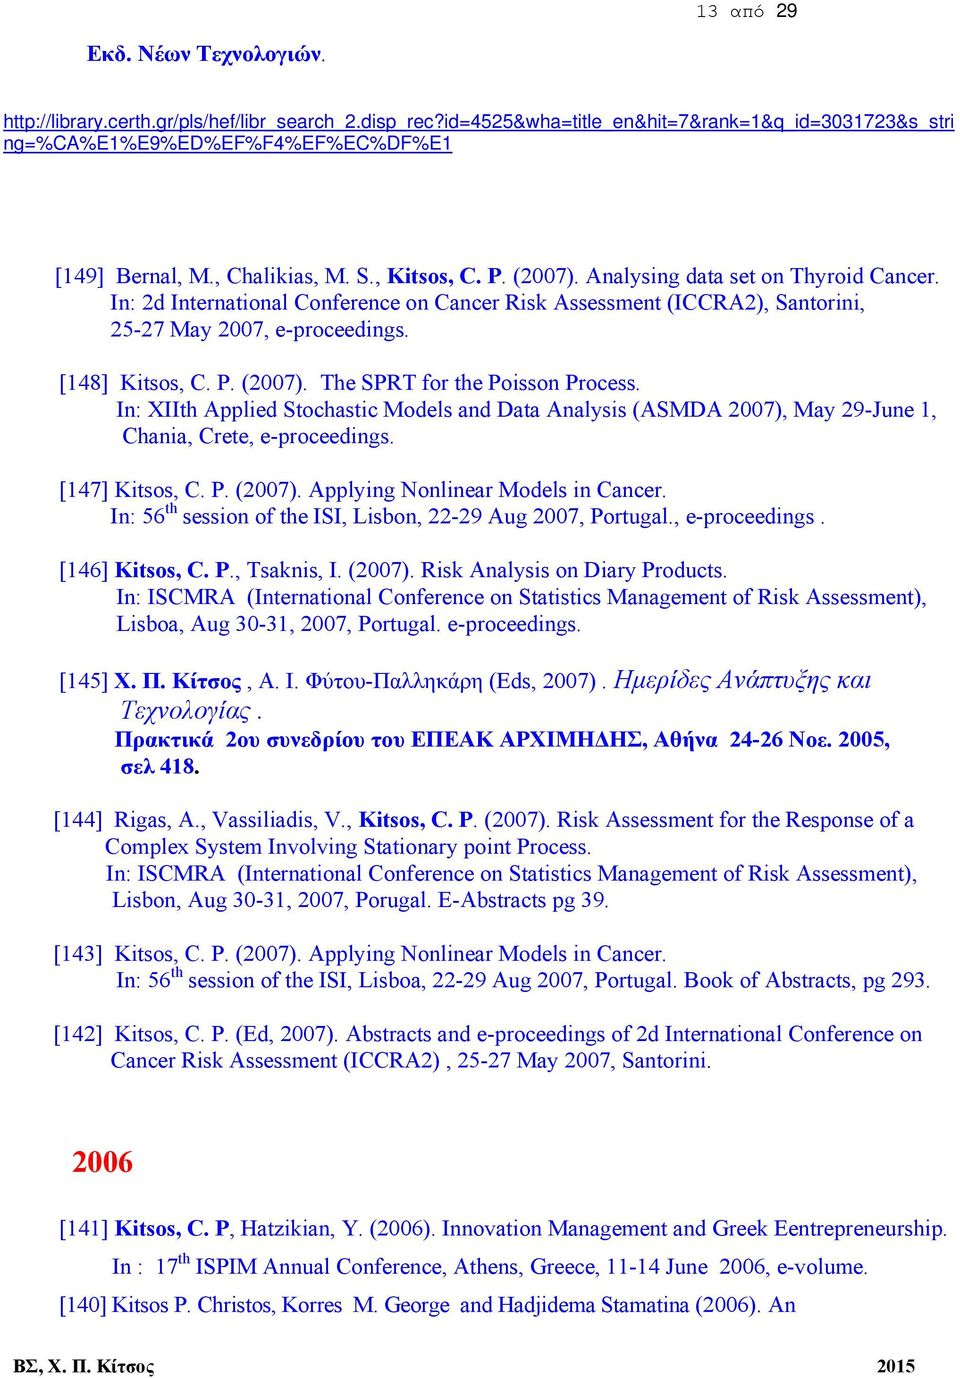 [148] Kitsos, C. P. (2007). The SPRT for the Poisson Process. In: XIIth Applied Stochastic Models and Data Analysis (ASMDA 2007), May 29-June 1, Chania, Crete, e-proceedings. [147] Kitsos, C. P. (2007). Applying Nonlinear Models in Cancer.